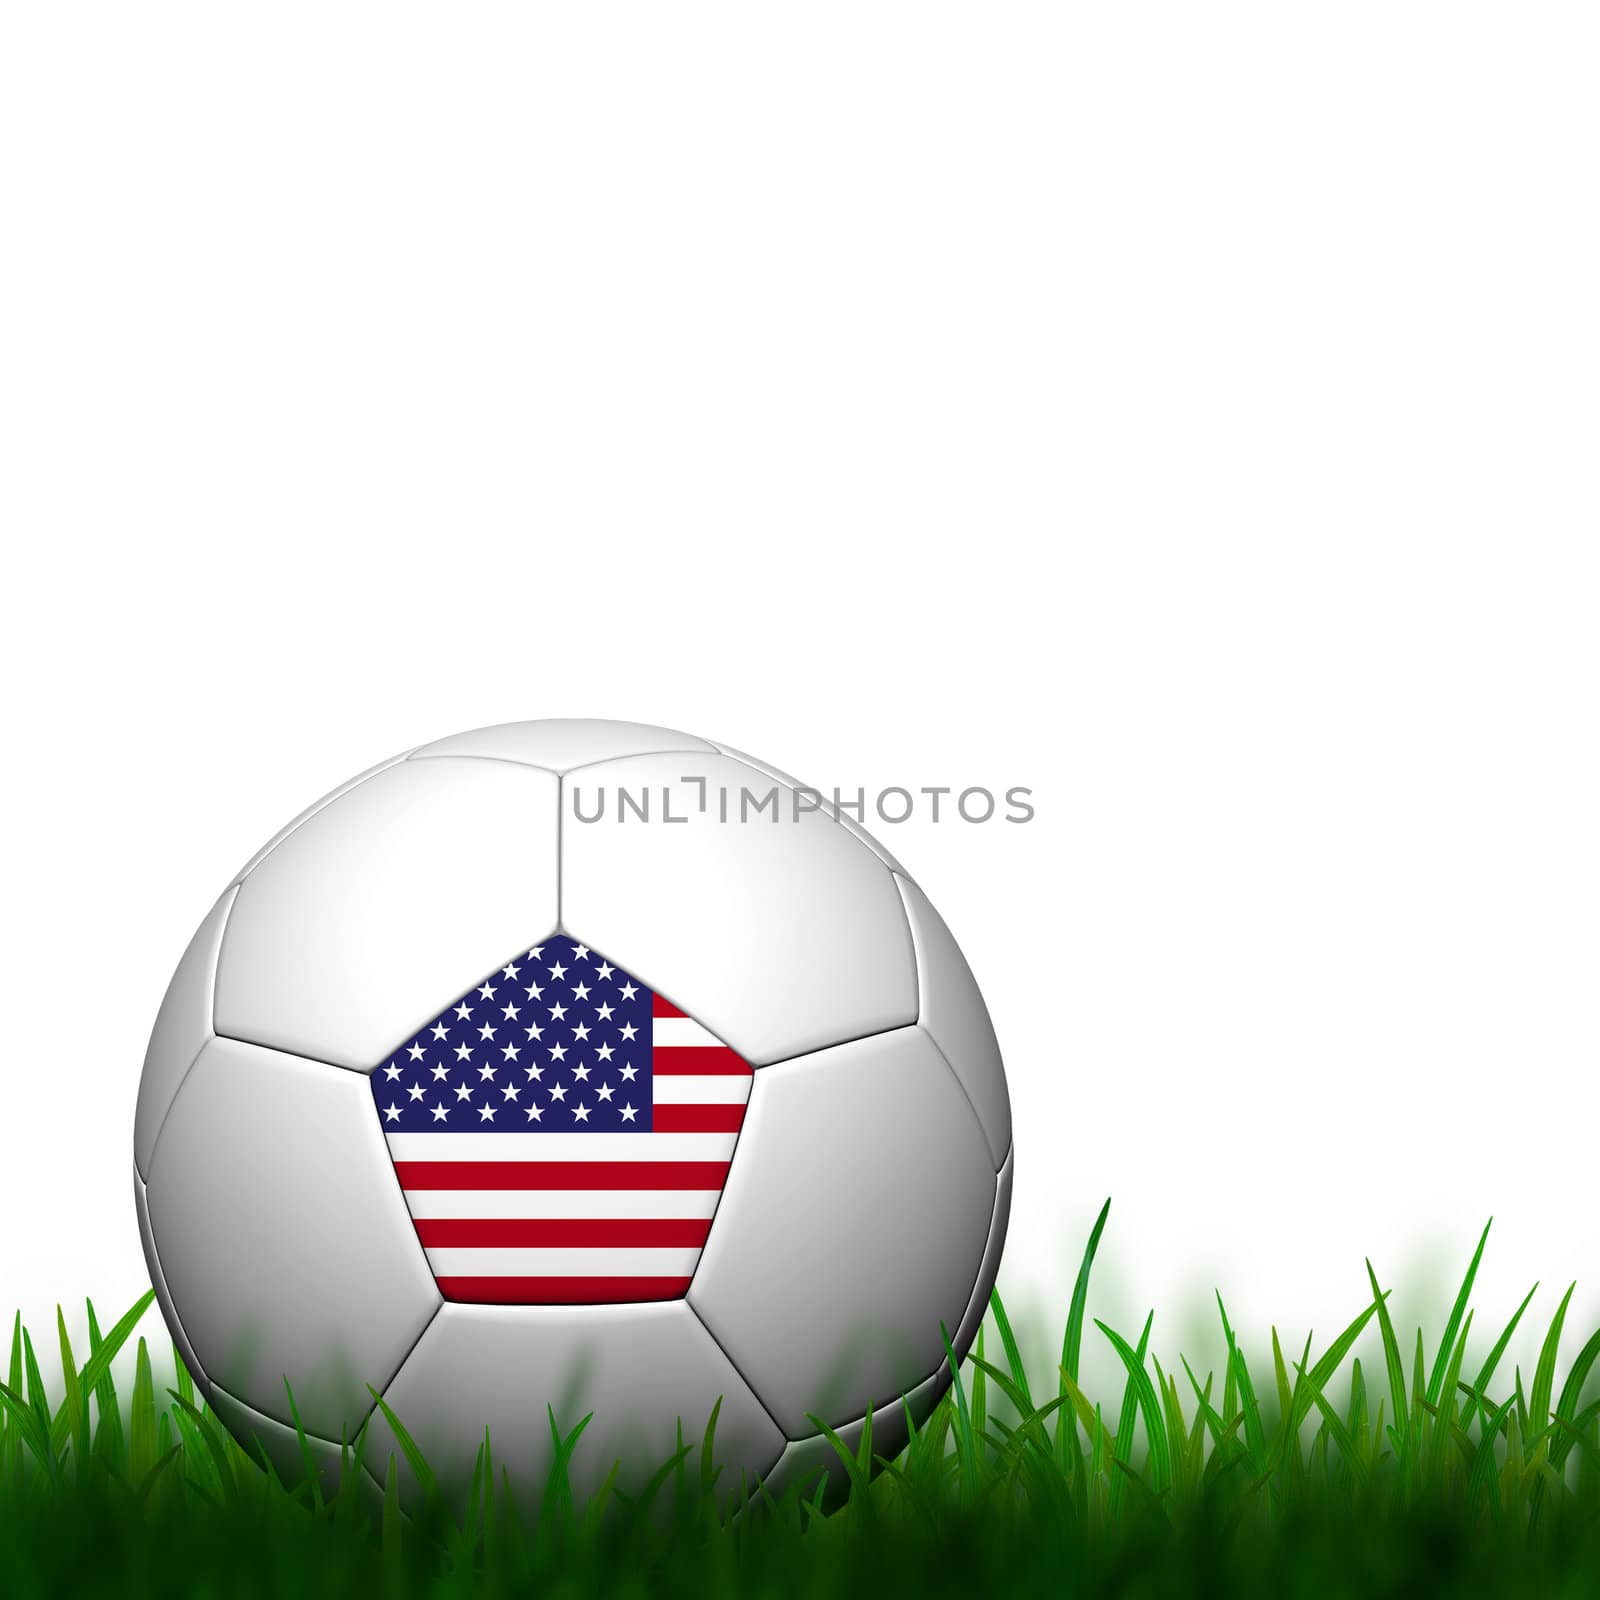 3D Football United States Flag Patter in green grass on white ba by jakgree